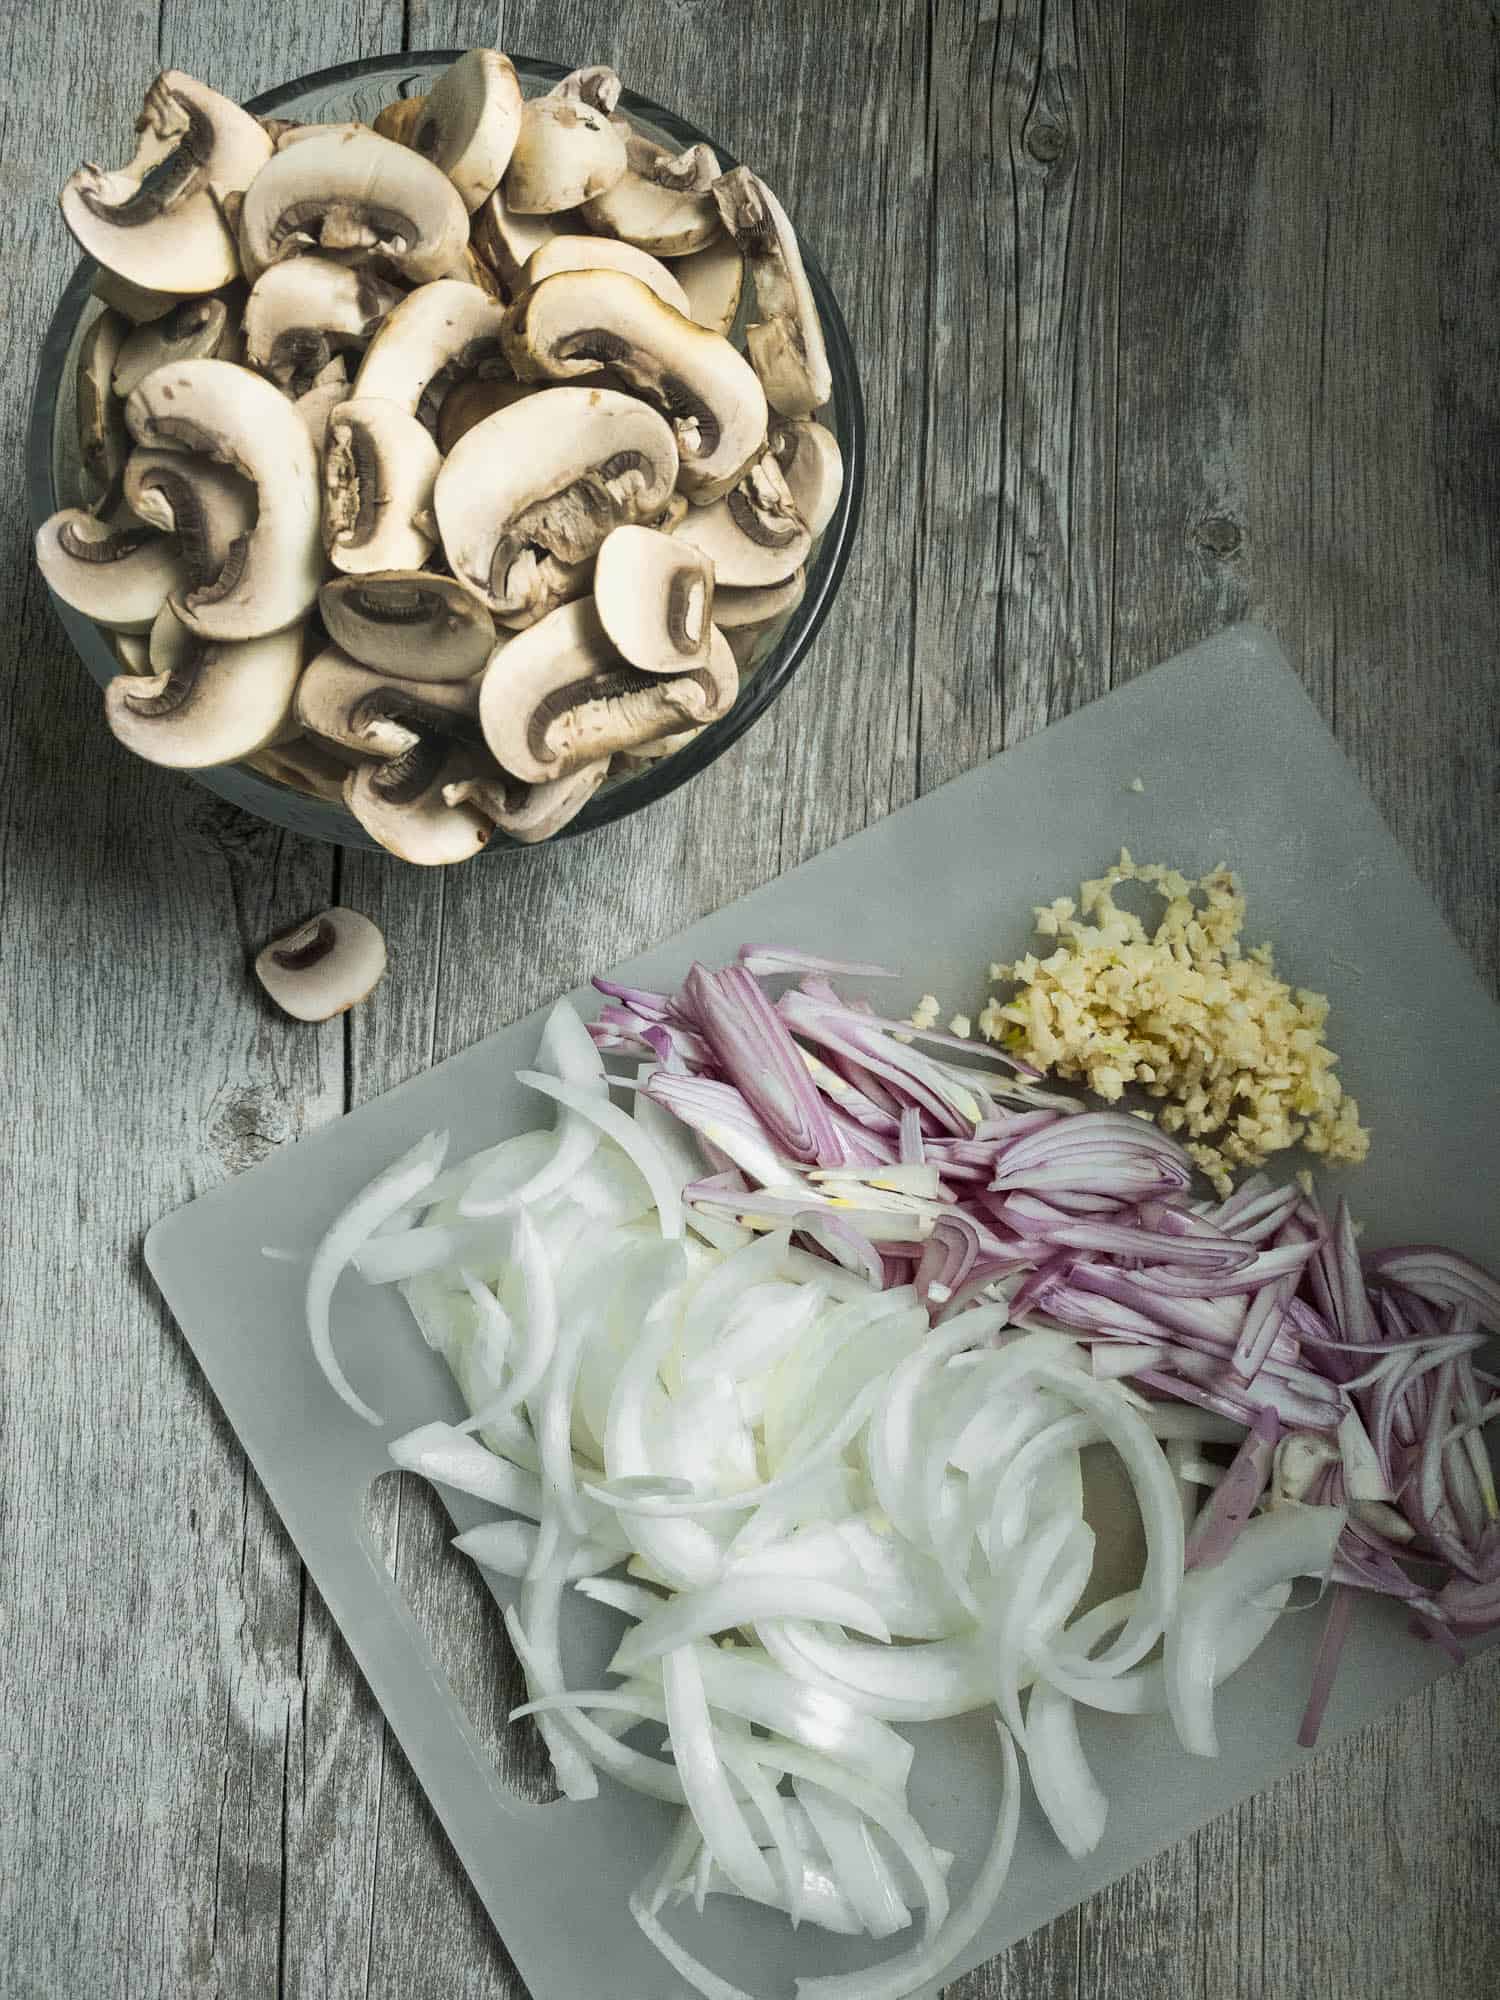 chopped mushrooms and onions on a cutting board